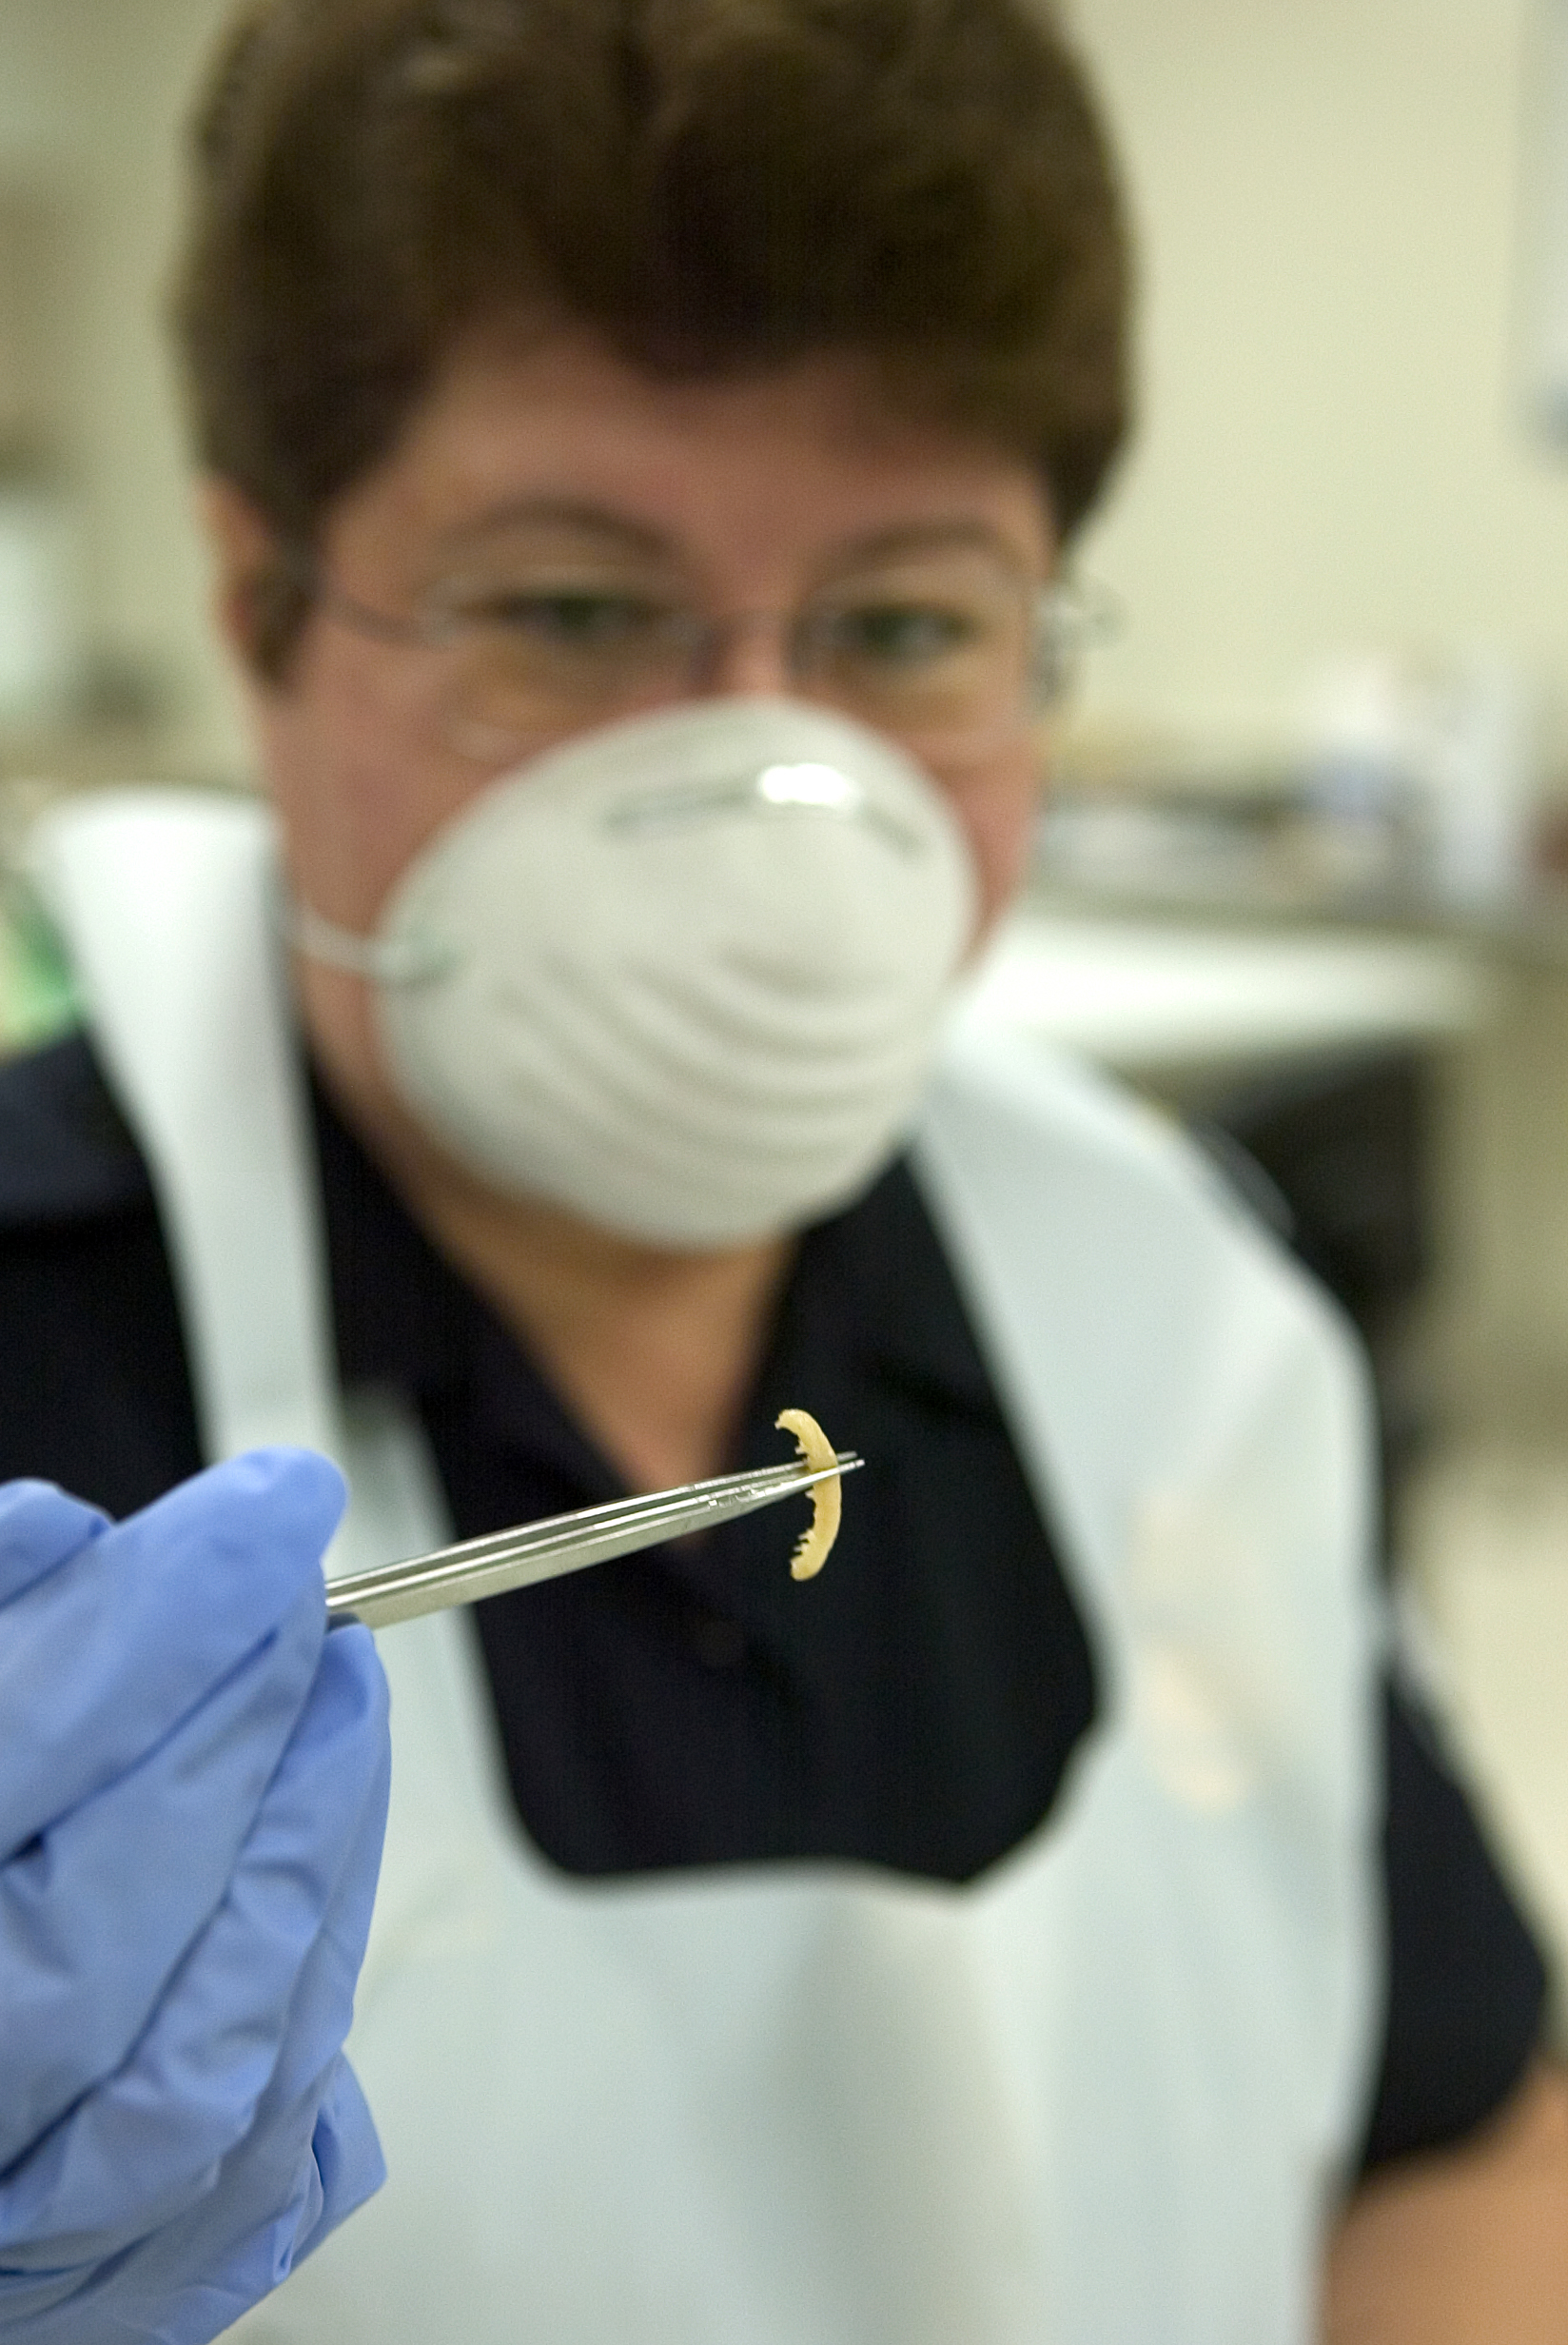 CBP Agriculture Specialist finds a pest potentially dangerous to American crops.